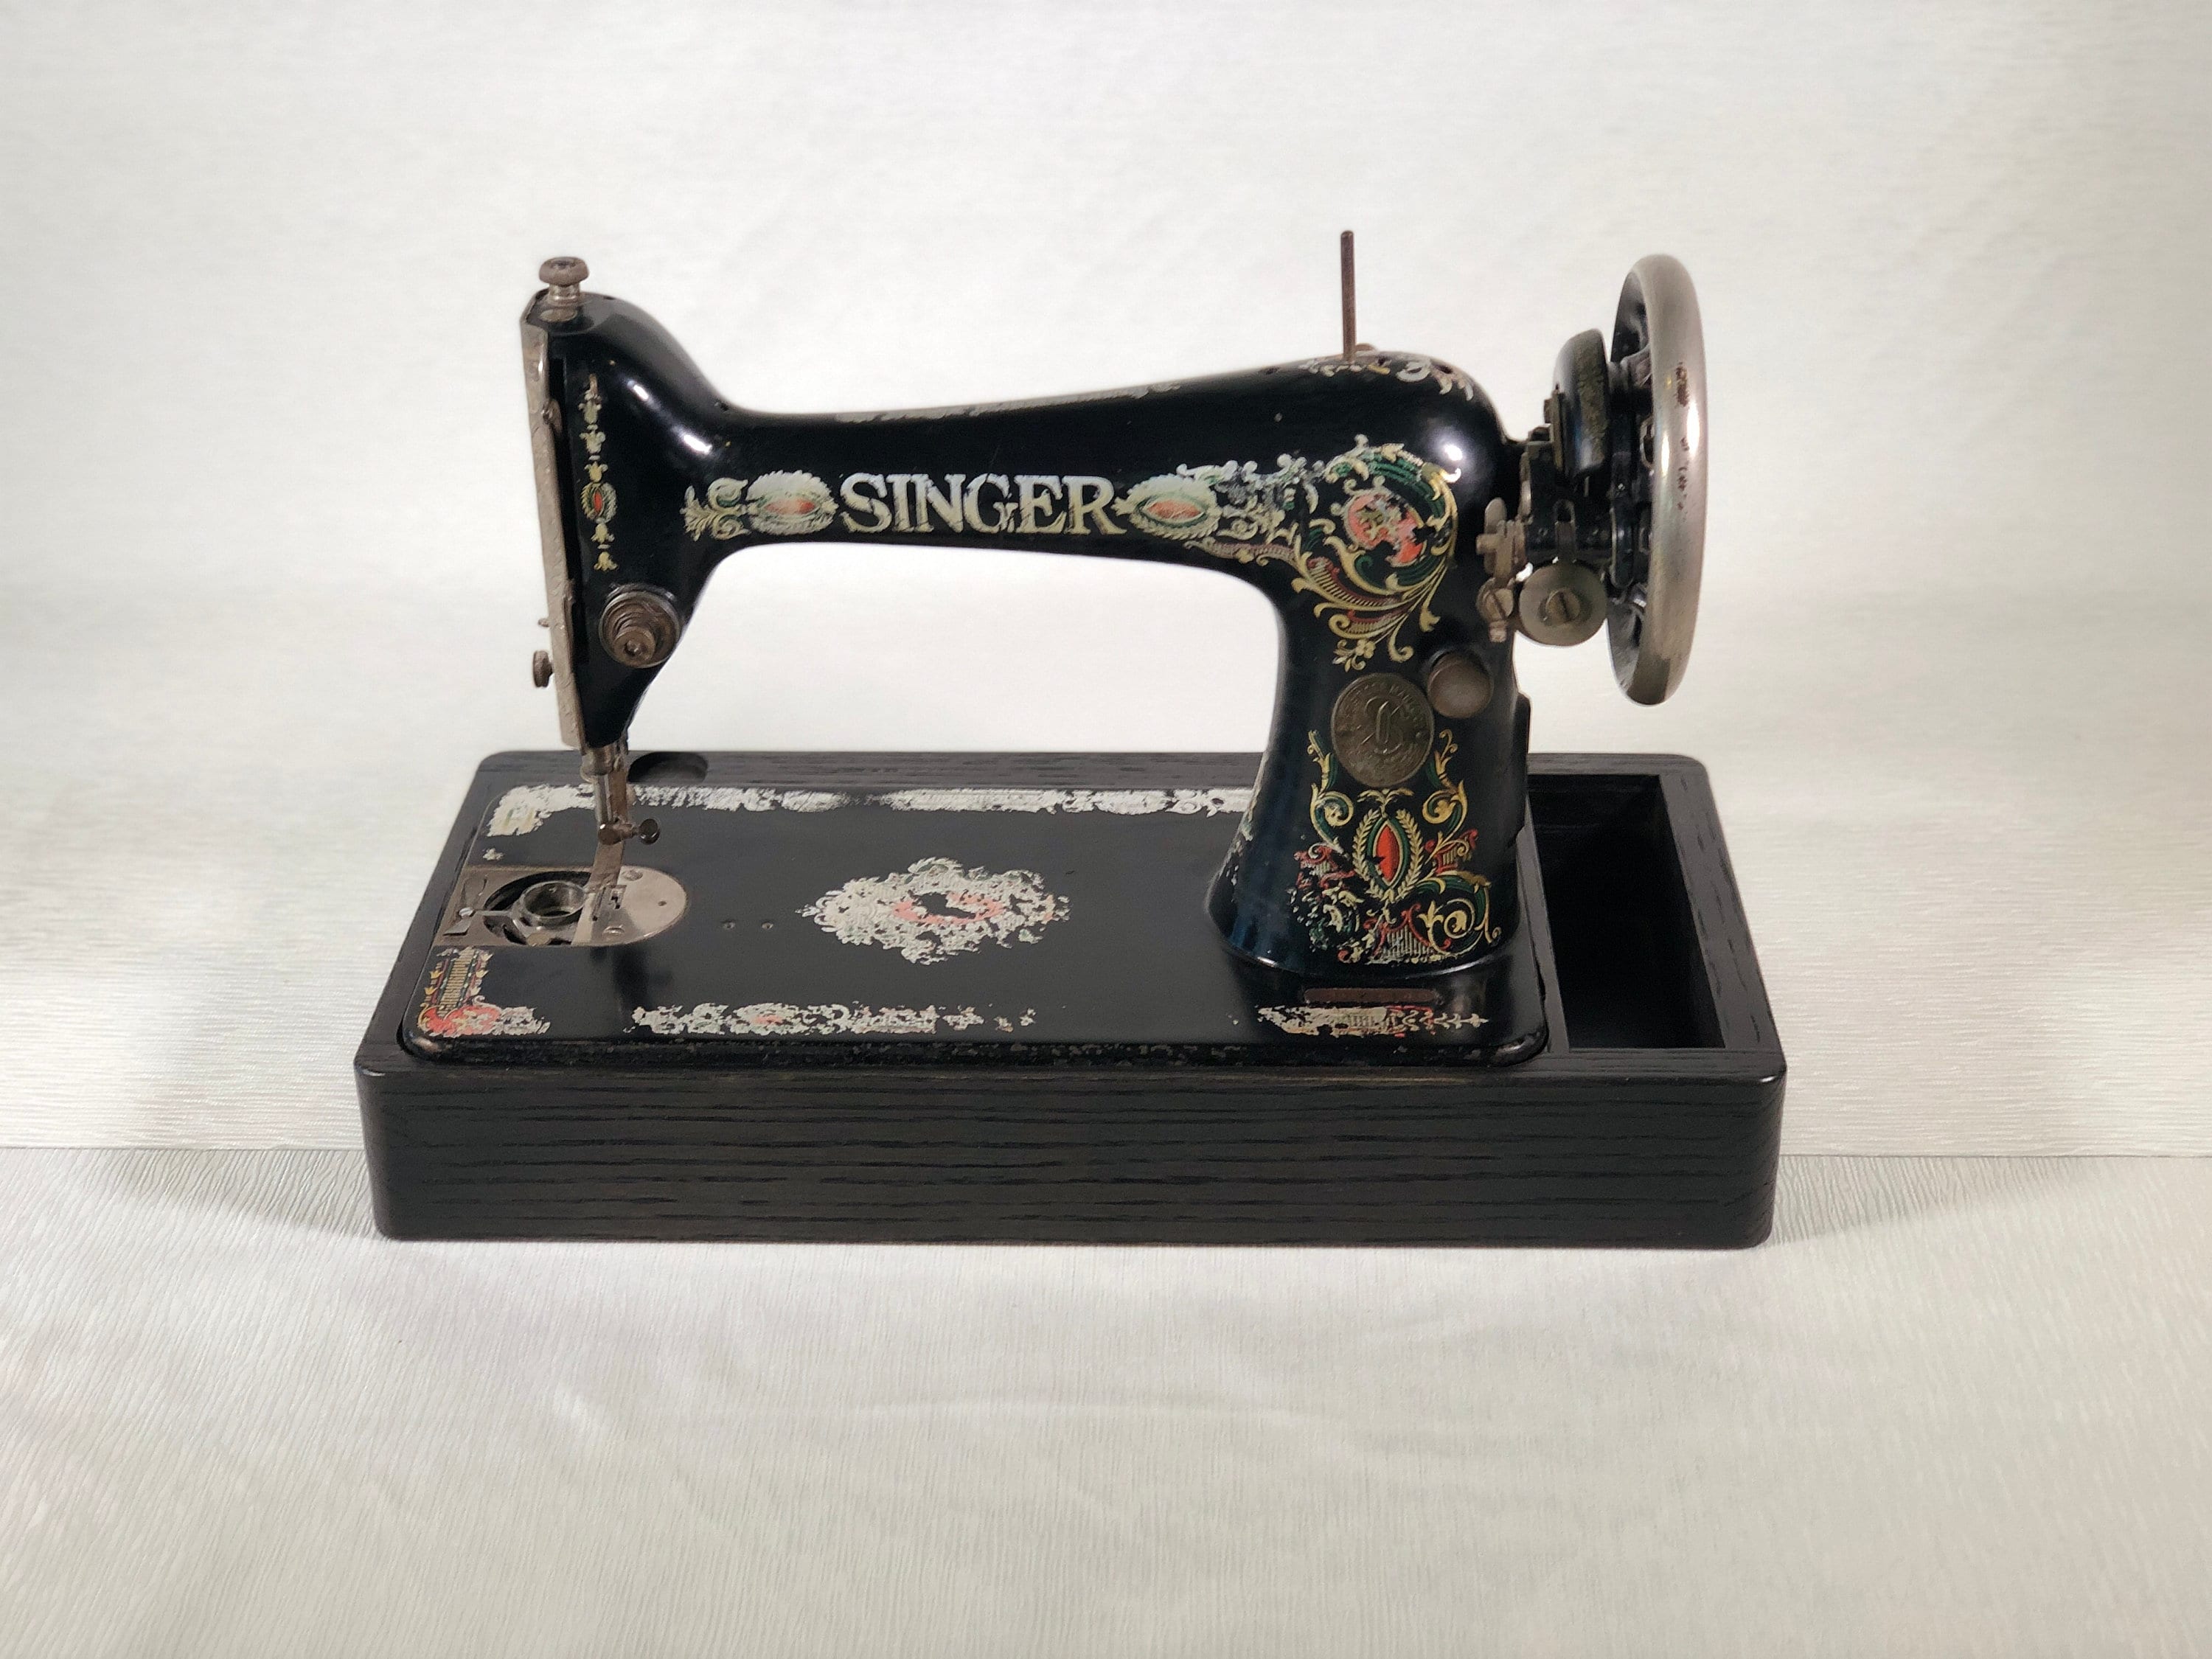 Singer Sewing Machine Lot Of Feet / Attachments For 99k In Green Card Box -  Lot K35